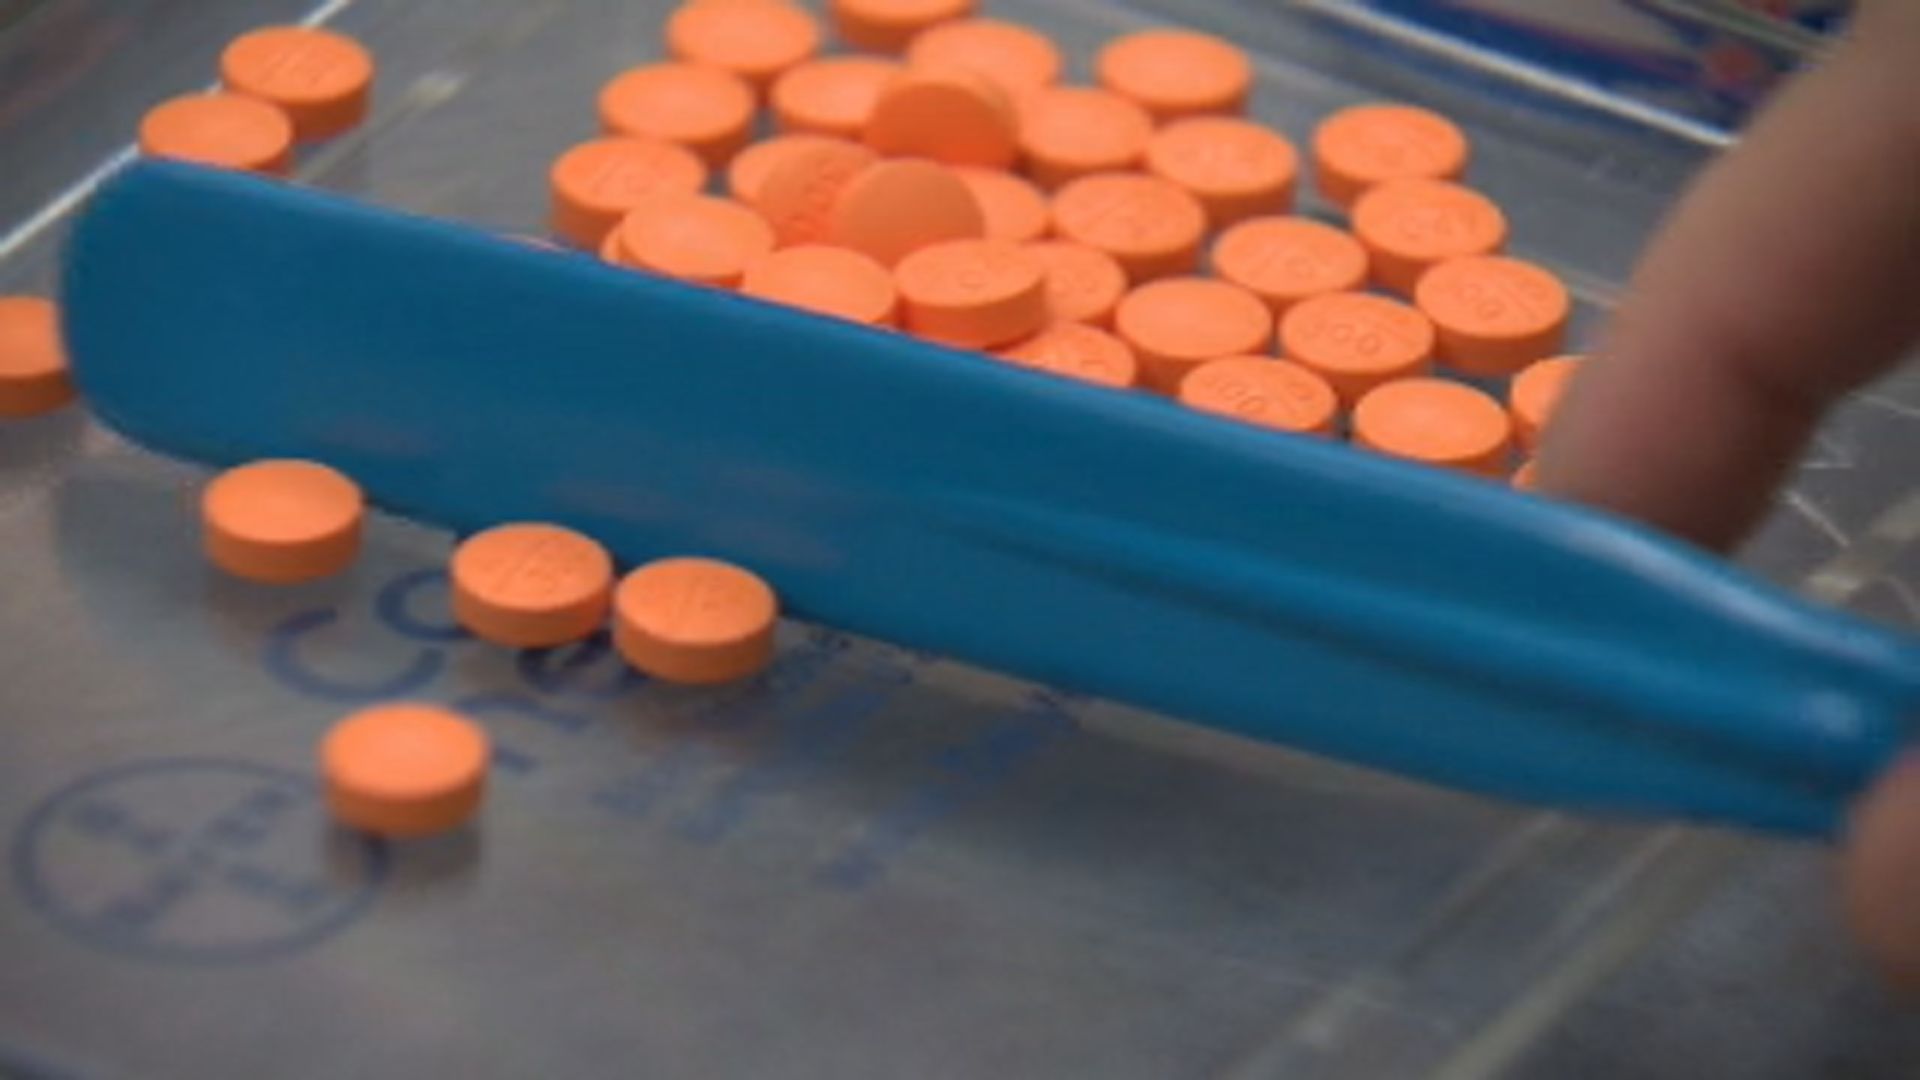 Southern Alberta grapples with prescription medication shortages